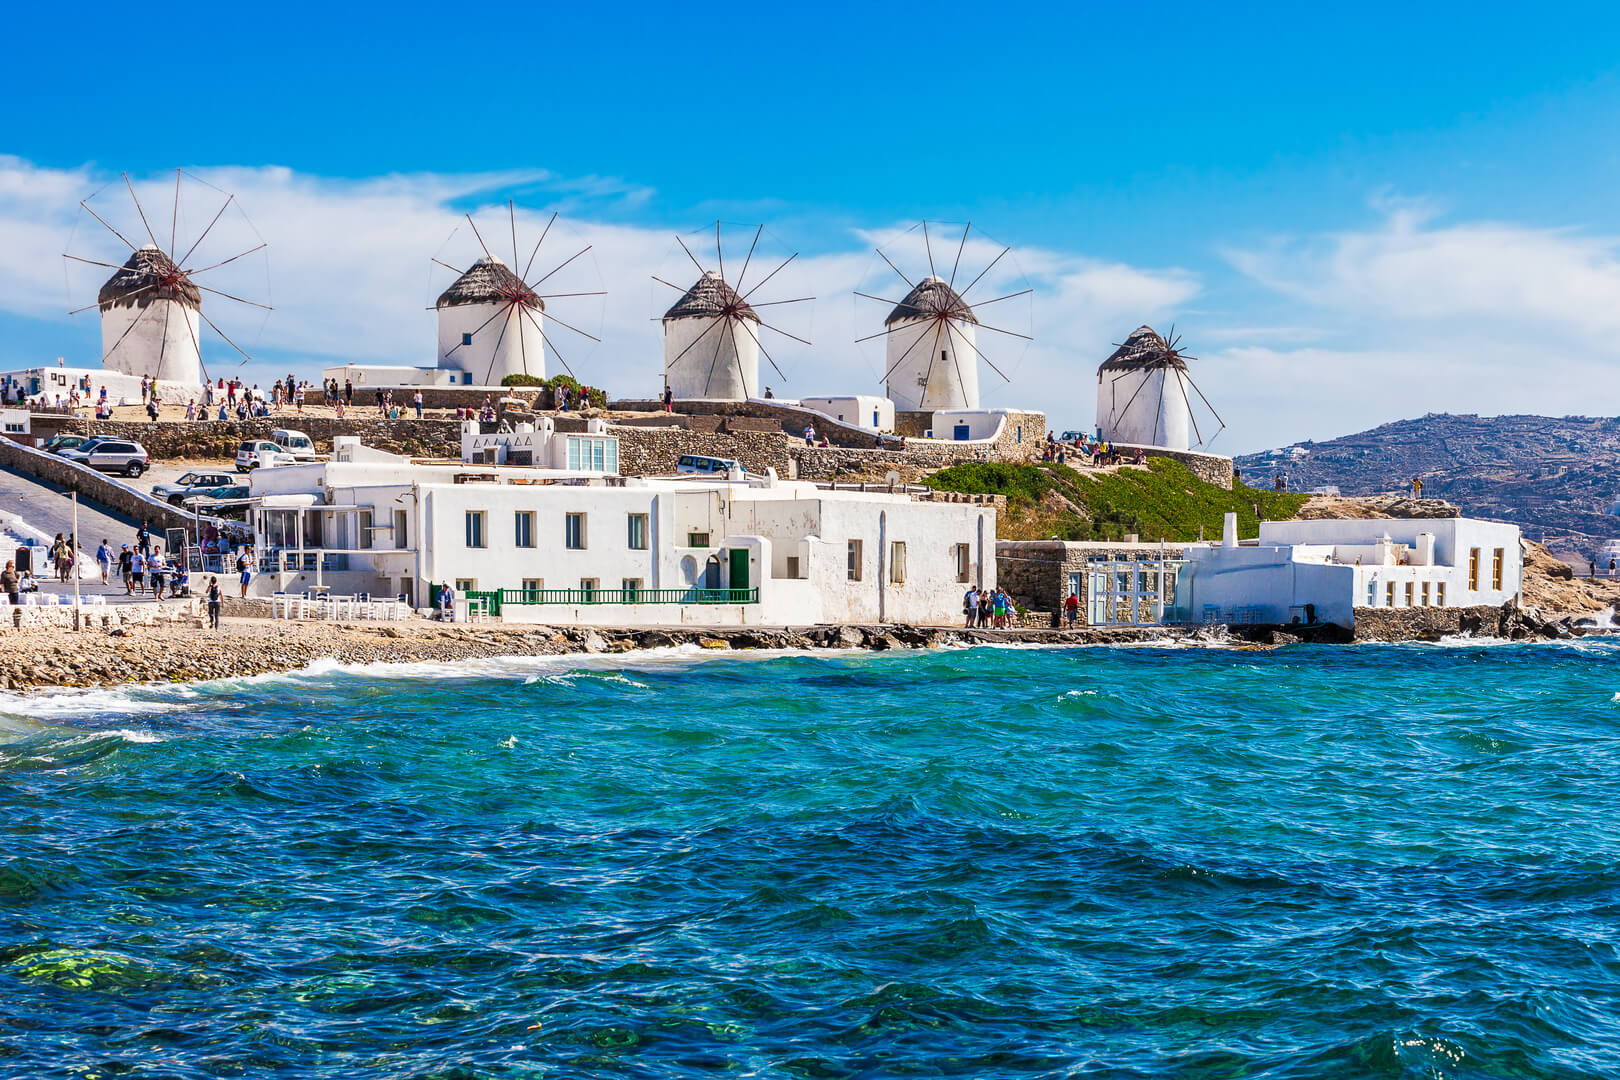 Iconic windmills viewpoint during a clear and bright summer sunny day along the blue sea and coasts of Mykonos, Greece
